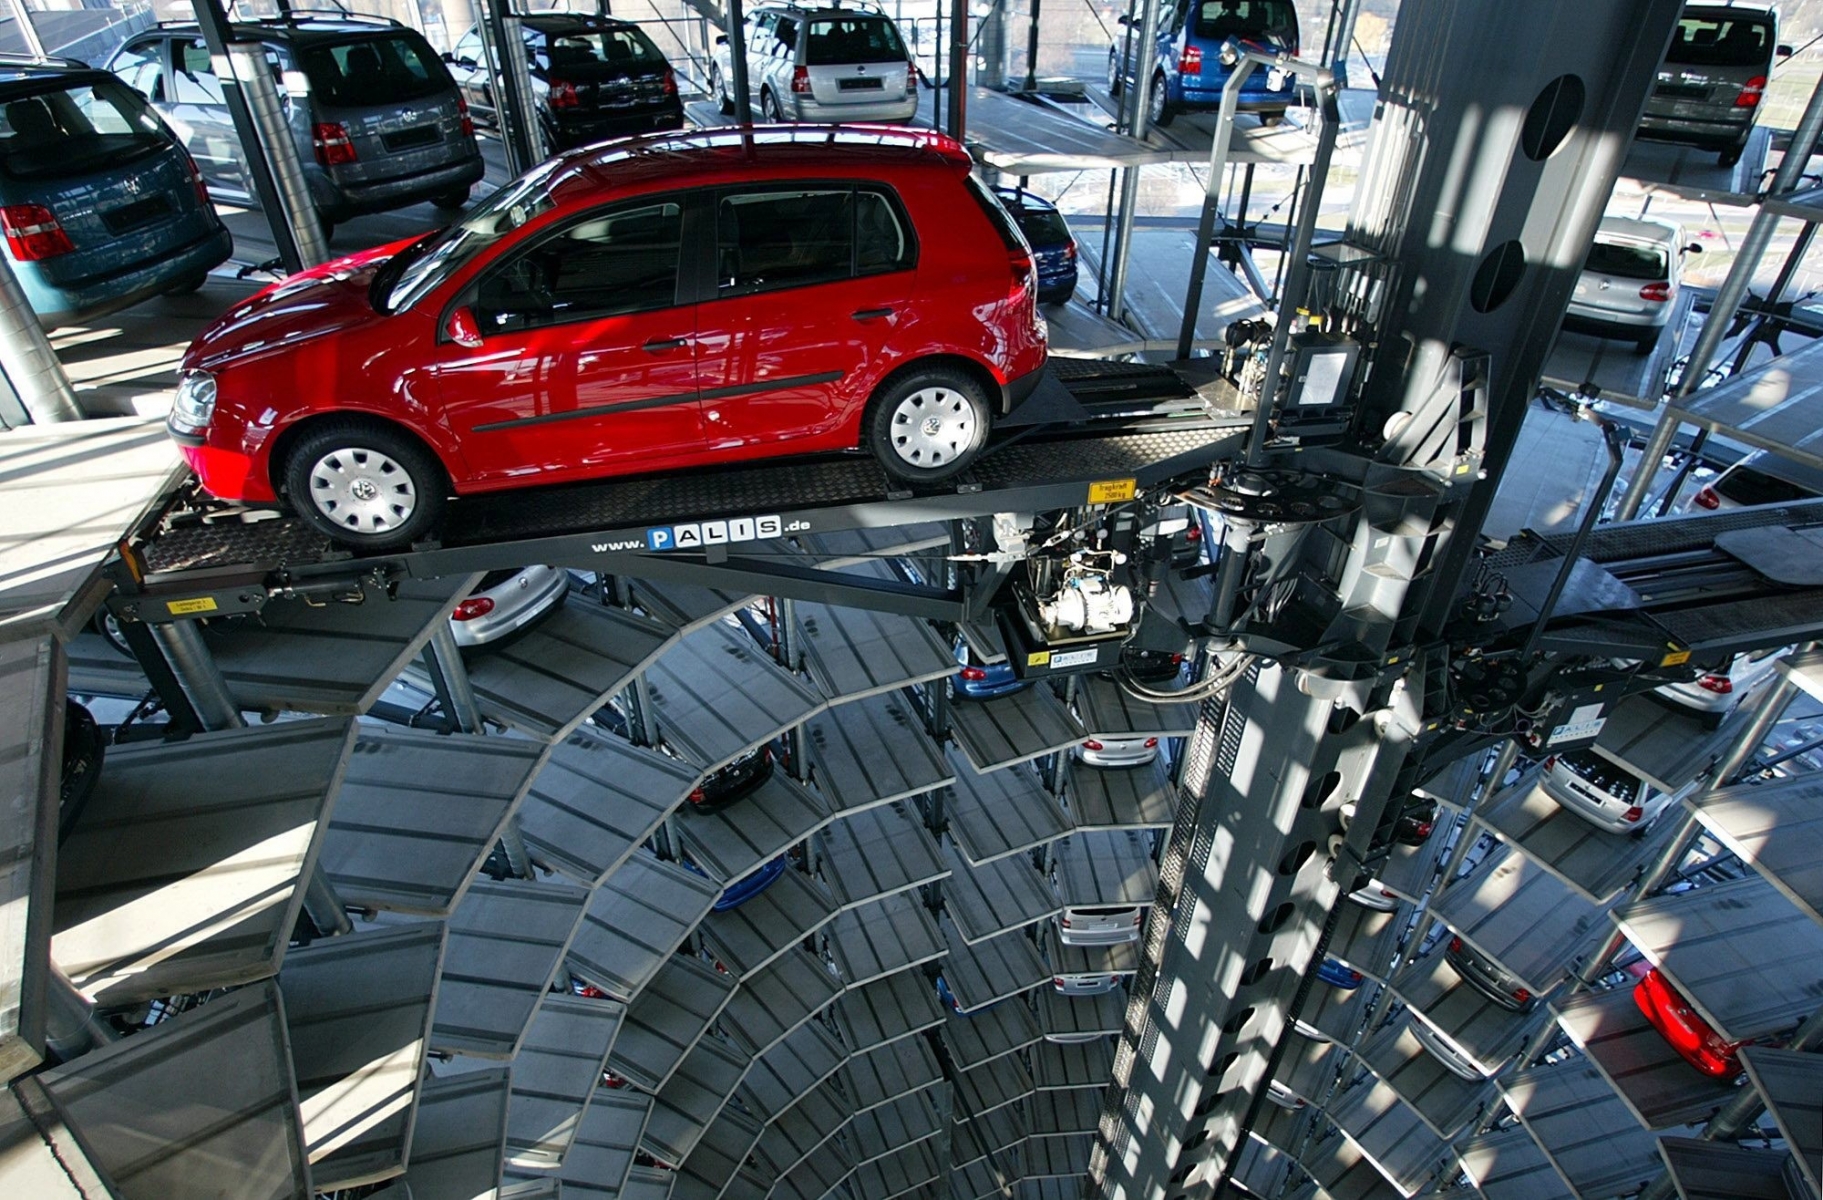 A VW Golf V car ( fifth generation Golf) is loaded in a " Distribution-Tower " at the Volkswagen "Car-Town" in Wolfsburg, northern Germany, in this March 5, 2004 file photo. German 'Bild' newspaper reported Thursday, Oct. 28, 2004 citing company sources, that between 5,000  and 15,000 jobs could be endangered in the Volkswagen plant in Wolfsburg.  (AP Photo/Fabian Bimmer)











  INDUSTRIE AUTOMOBILE